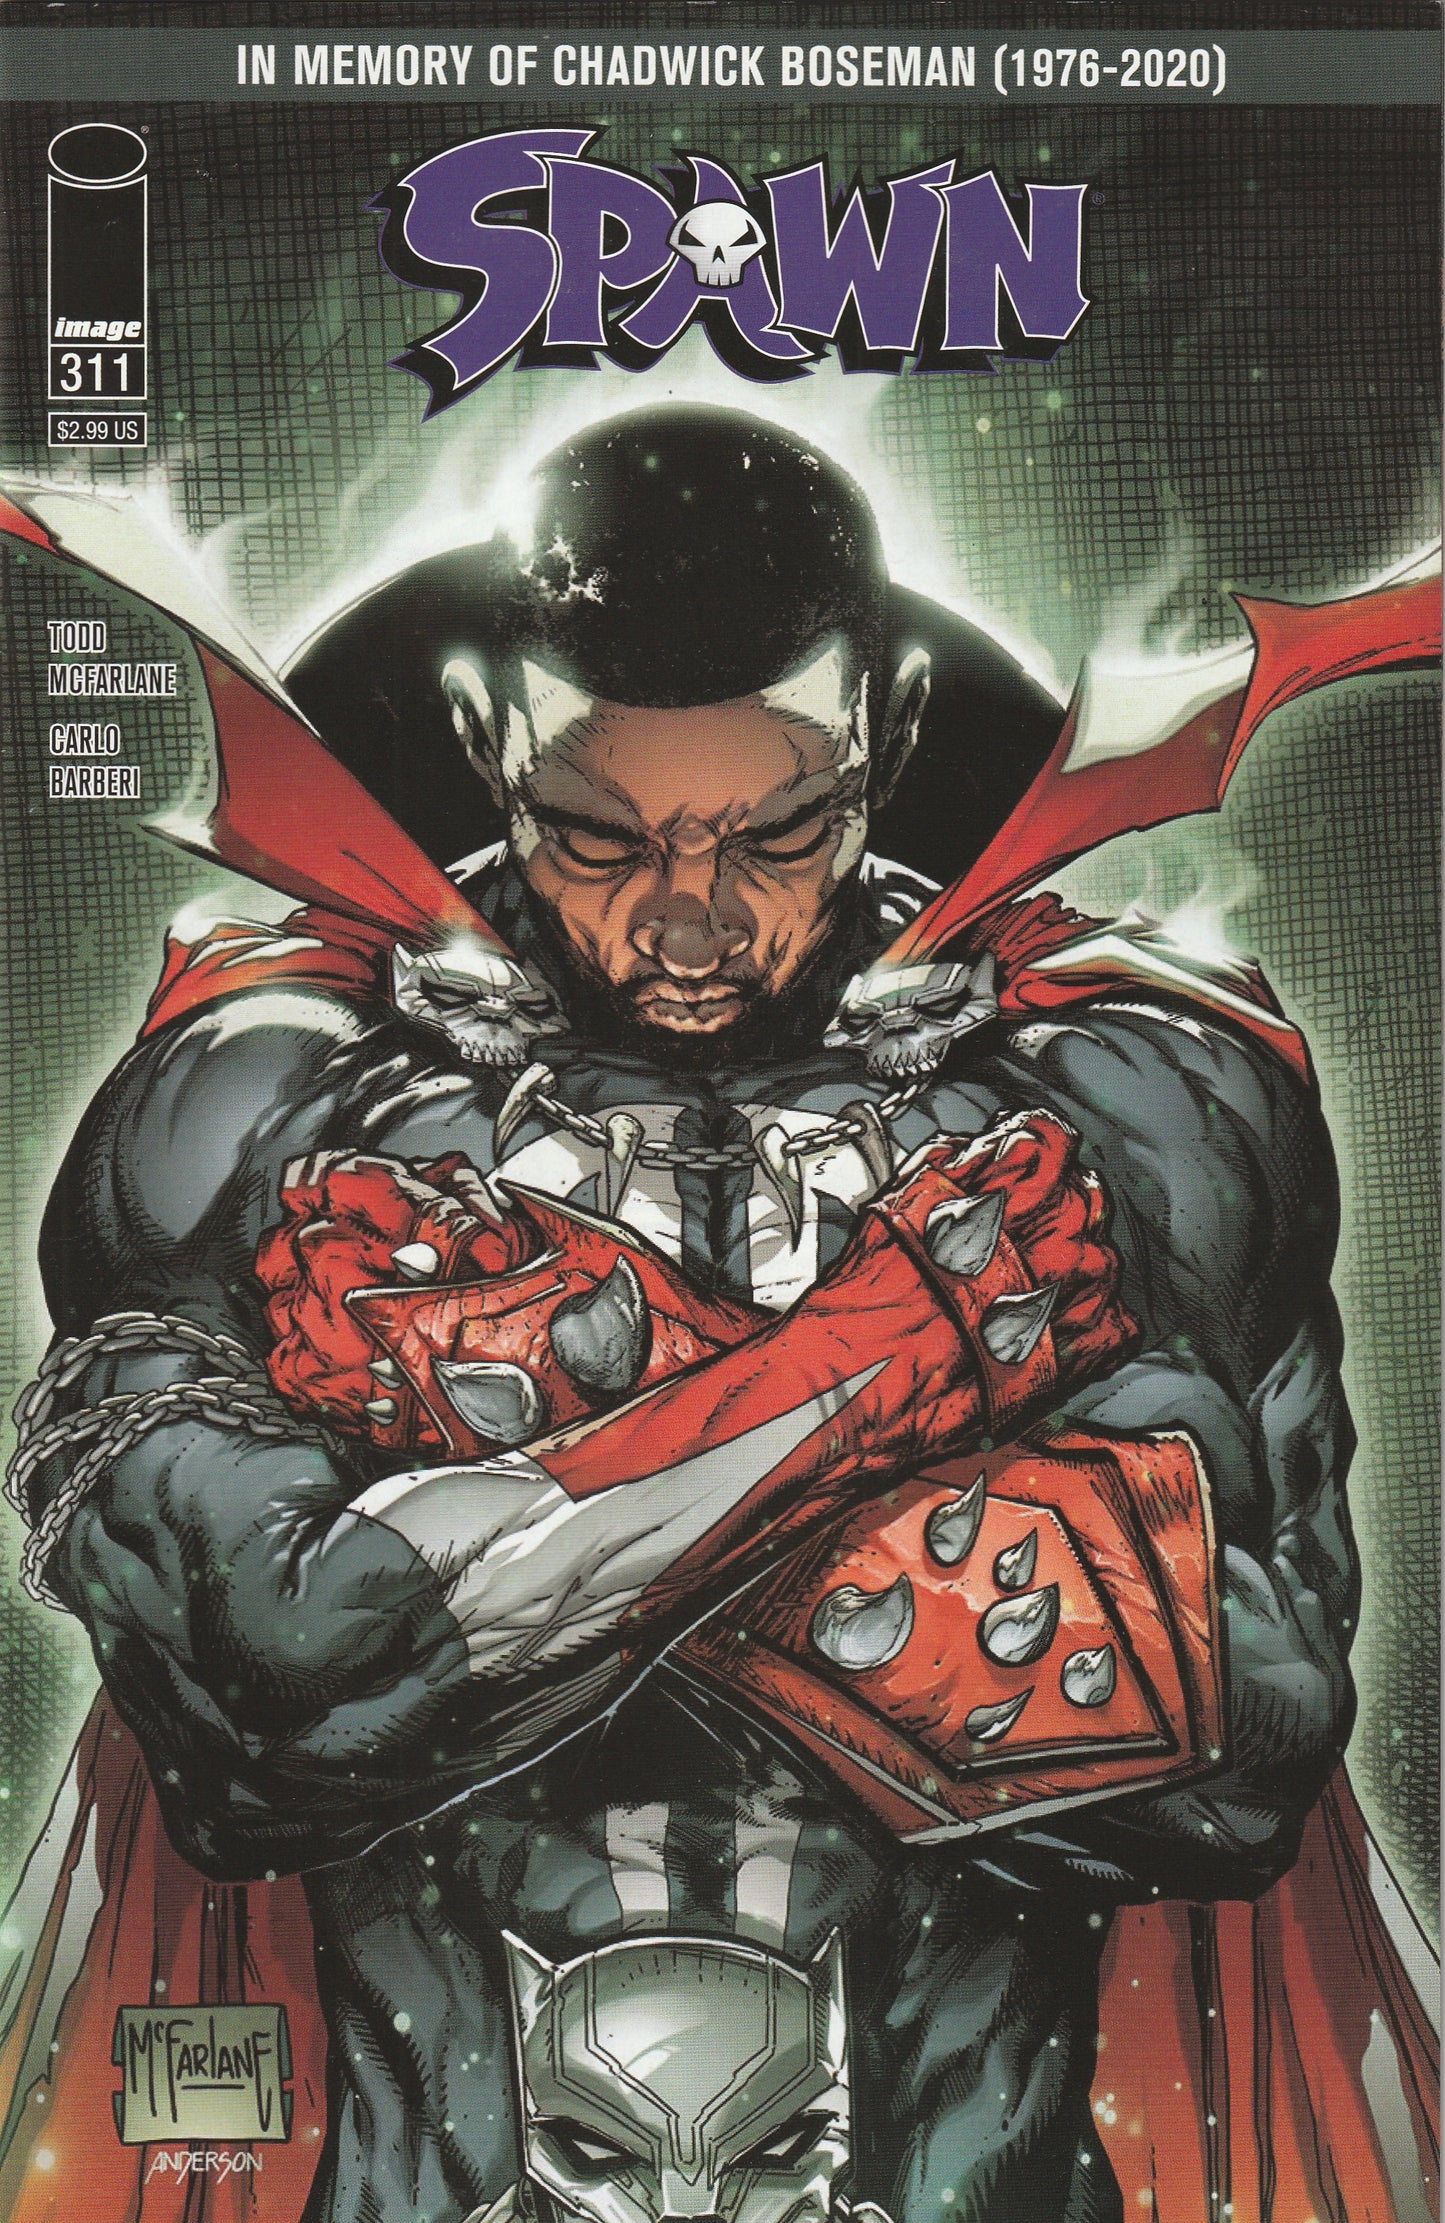 Spawn #311 (2020) - Cover B by Todd McFarlane